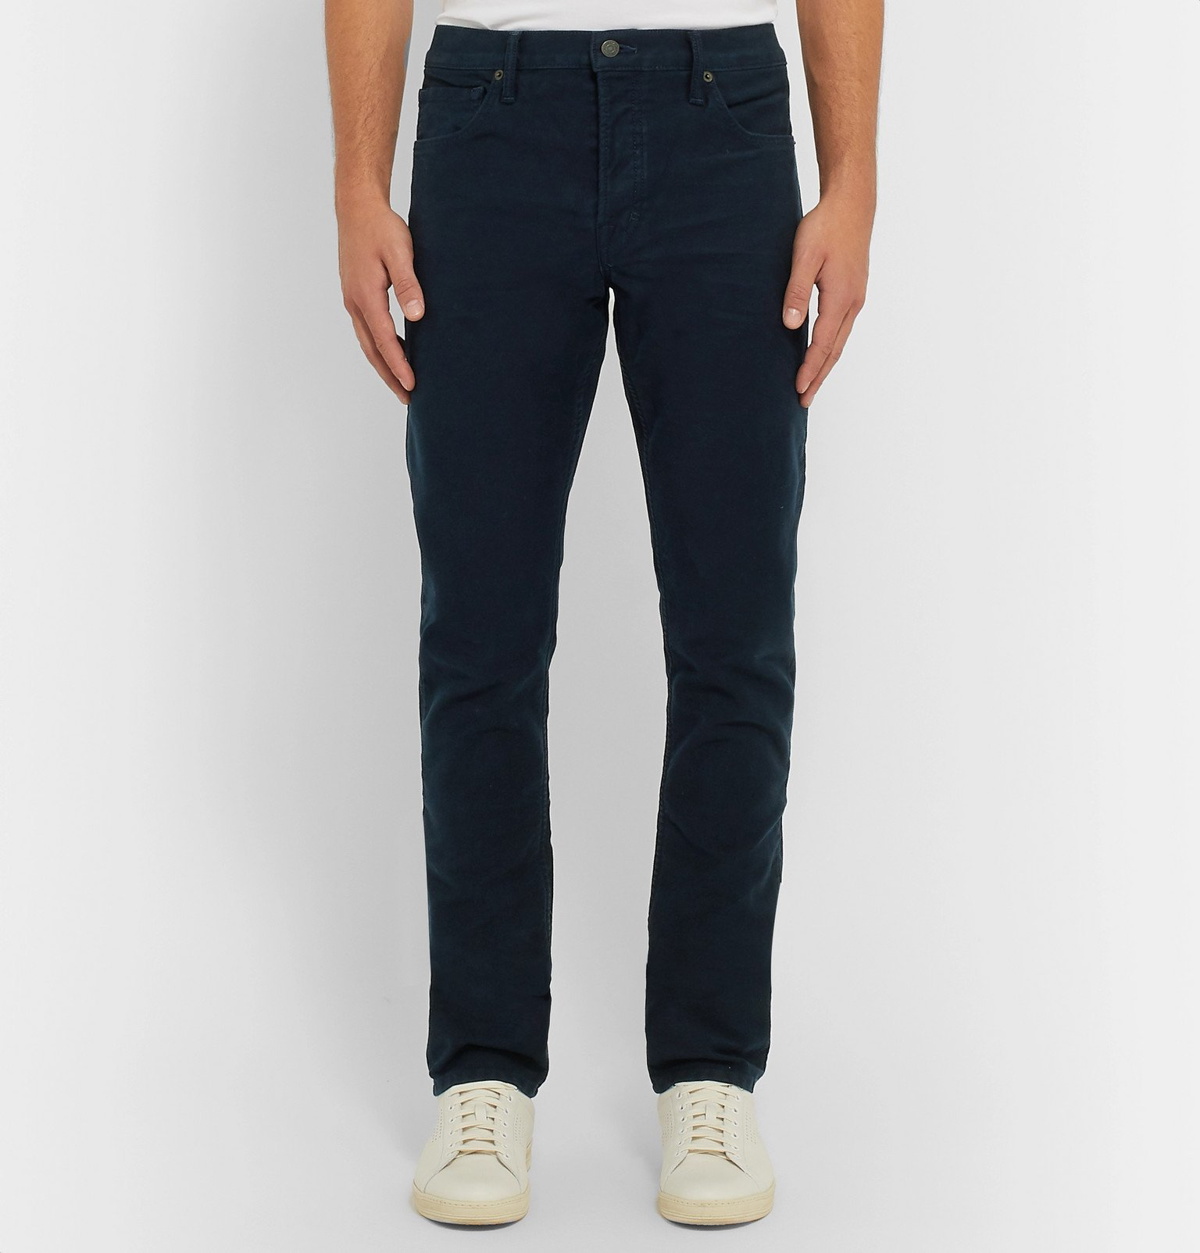 TOM FORD - Navy Slim-Fit Cotton-Blend Moleskin Trousers - Blue TOM FORD